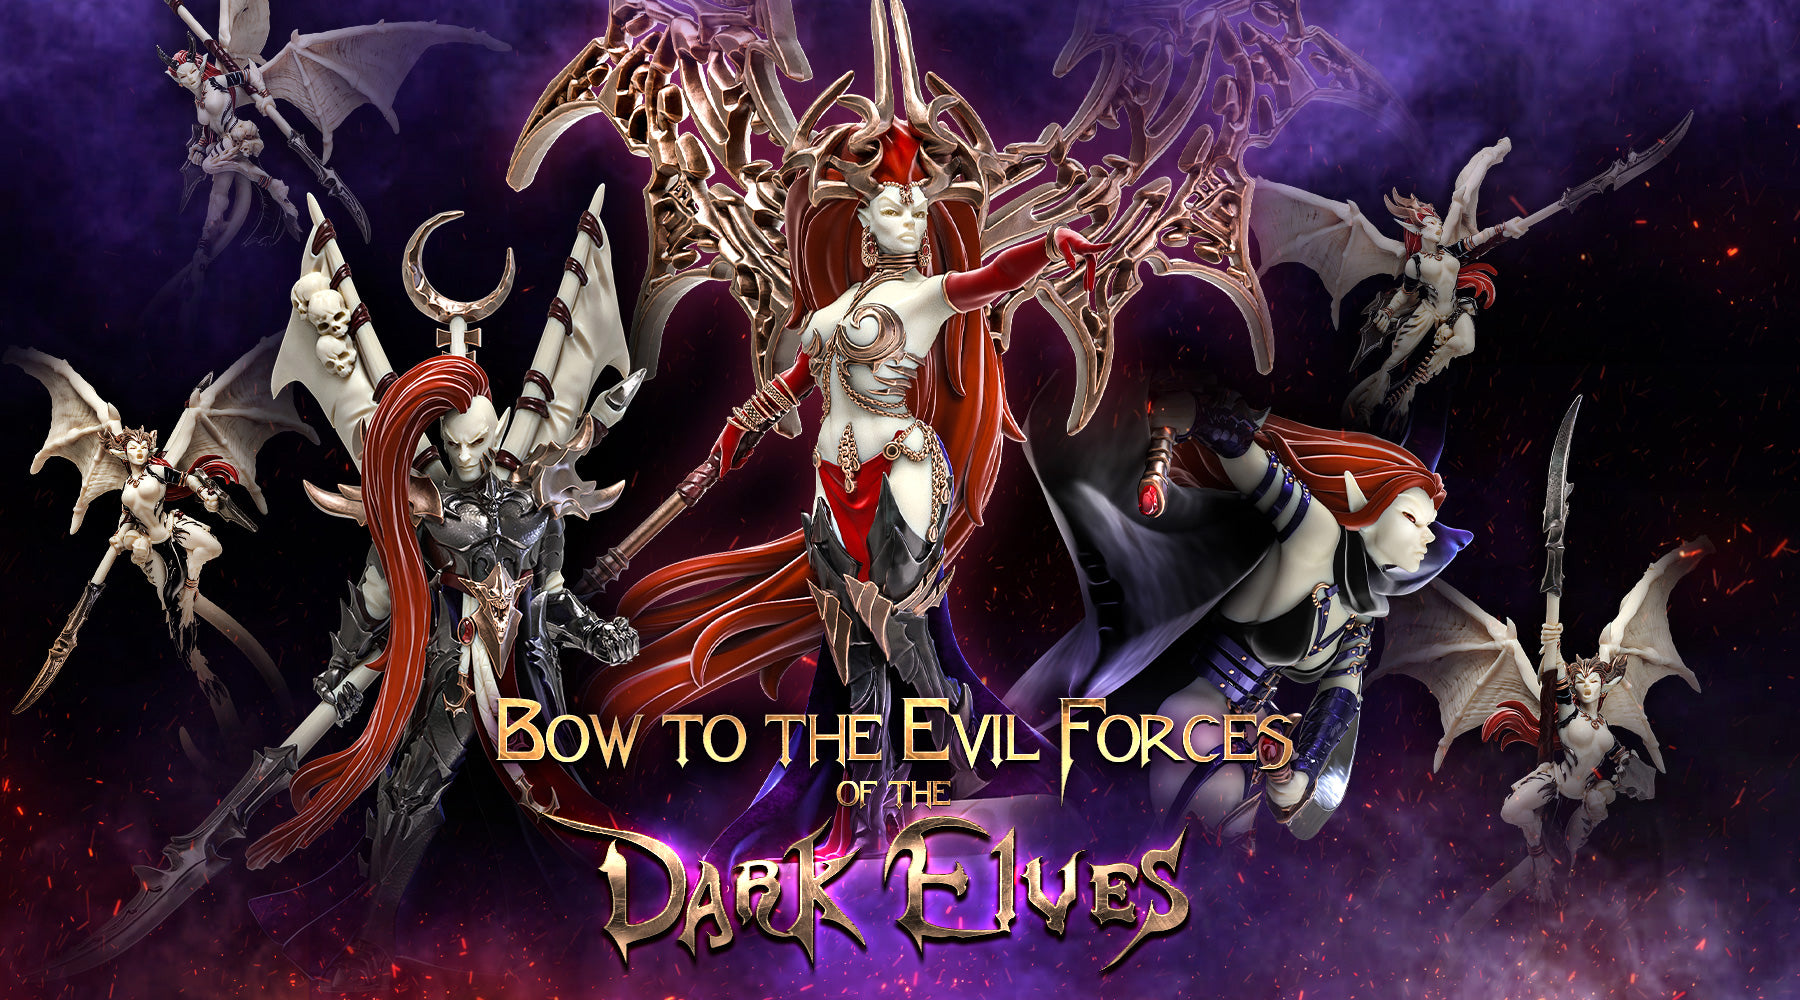 Bow to the Evil Forces of the Dark Elves